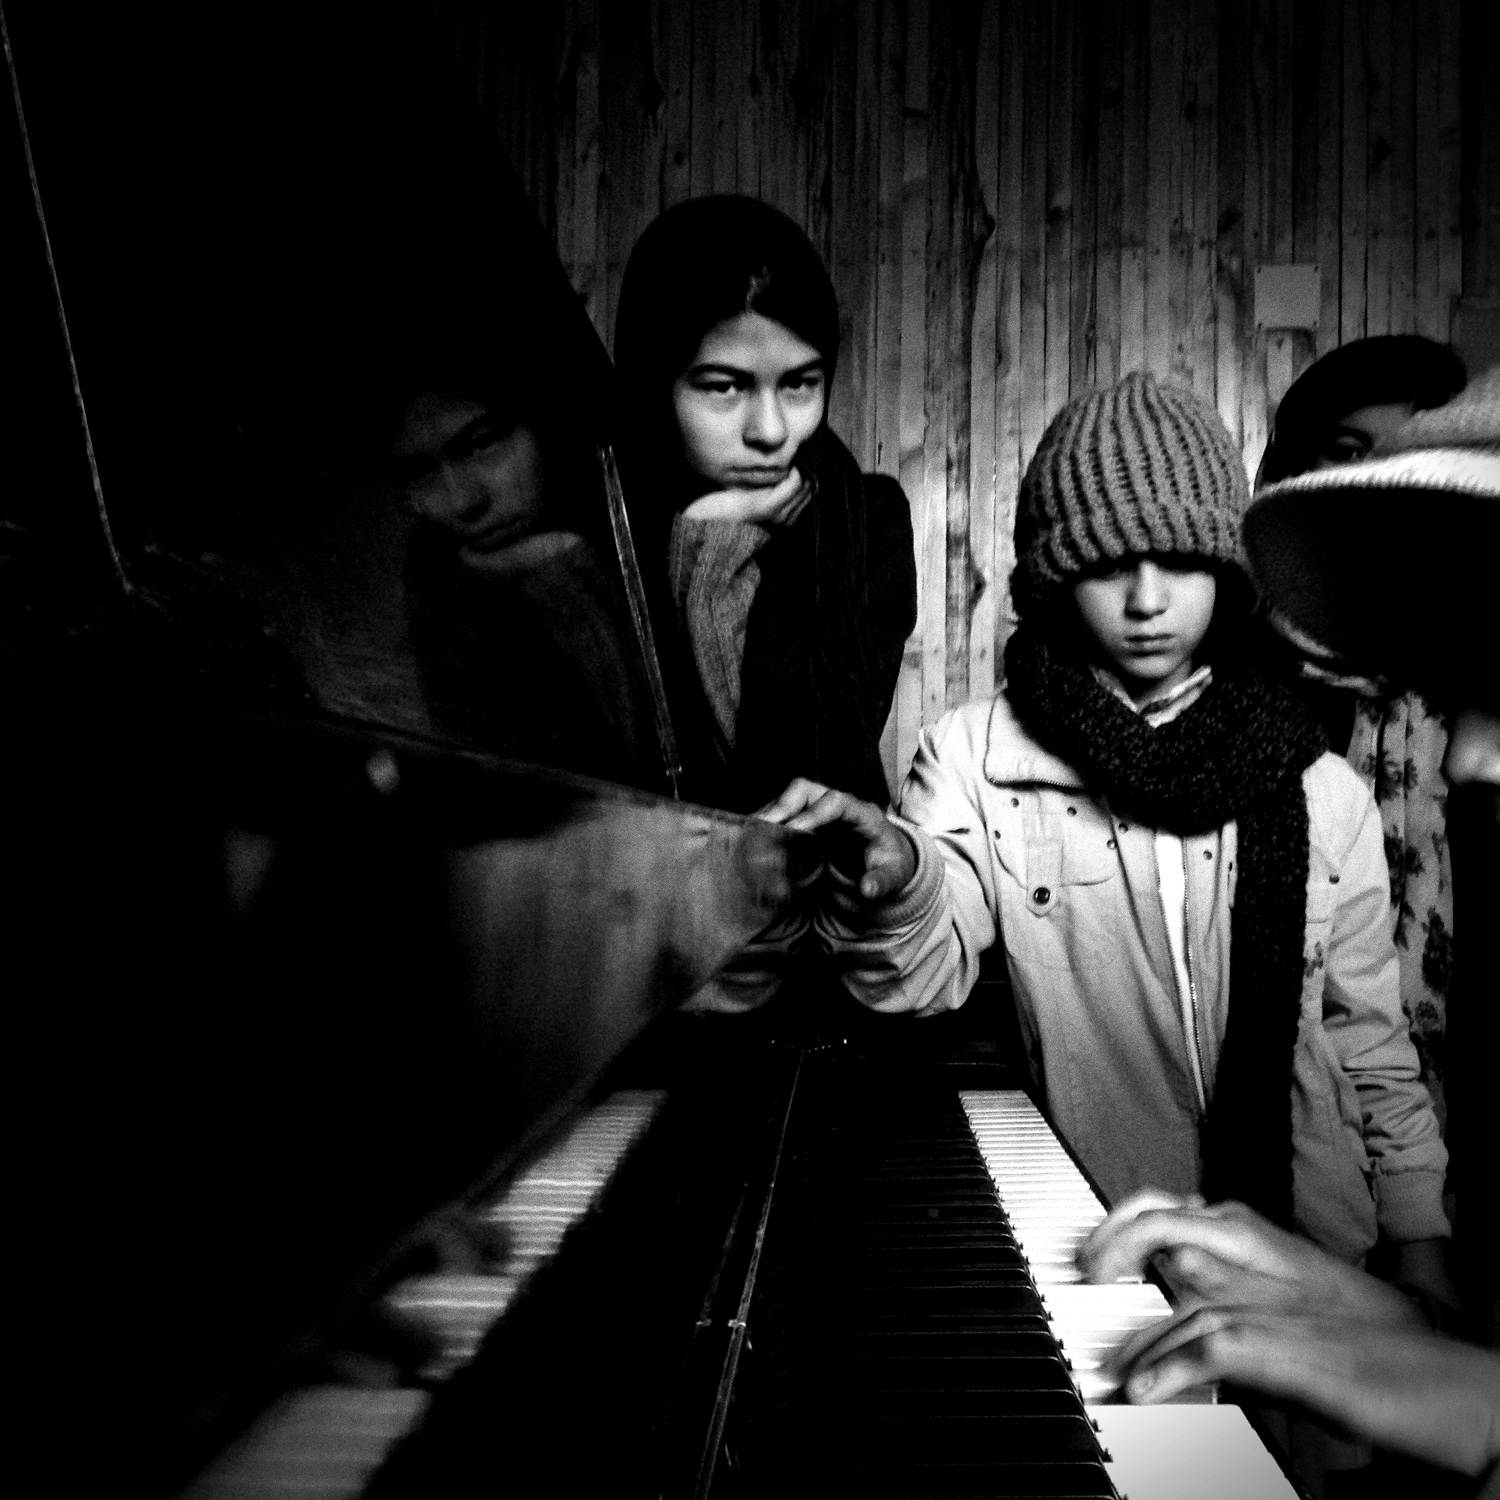 #Girls on #piano in #Afghanistan. Not dissimilar to throwing a shoe at a #president in the #US. 12.22.2013